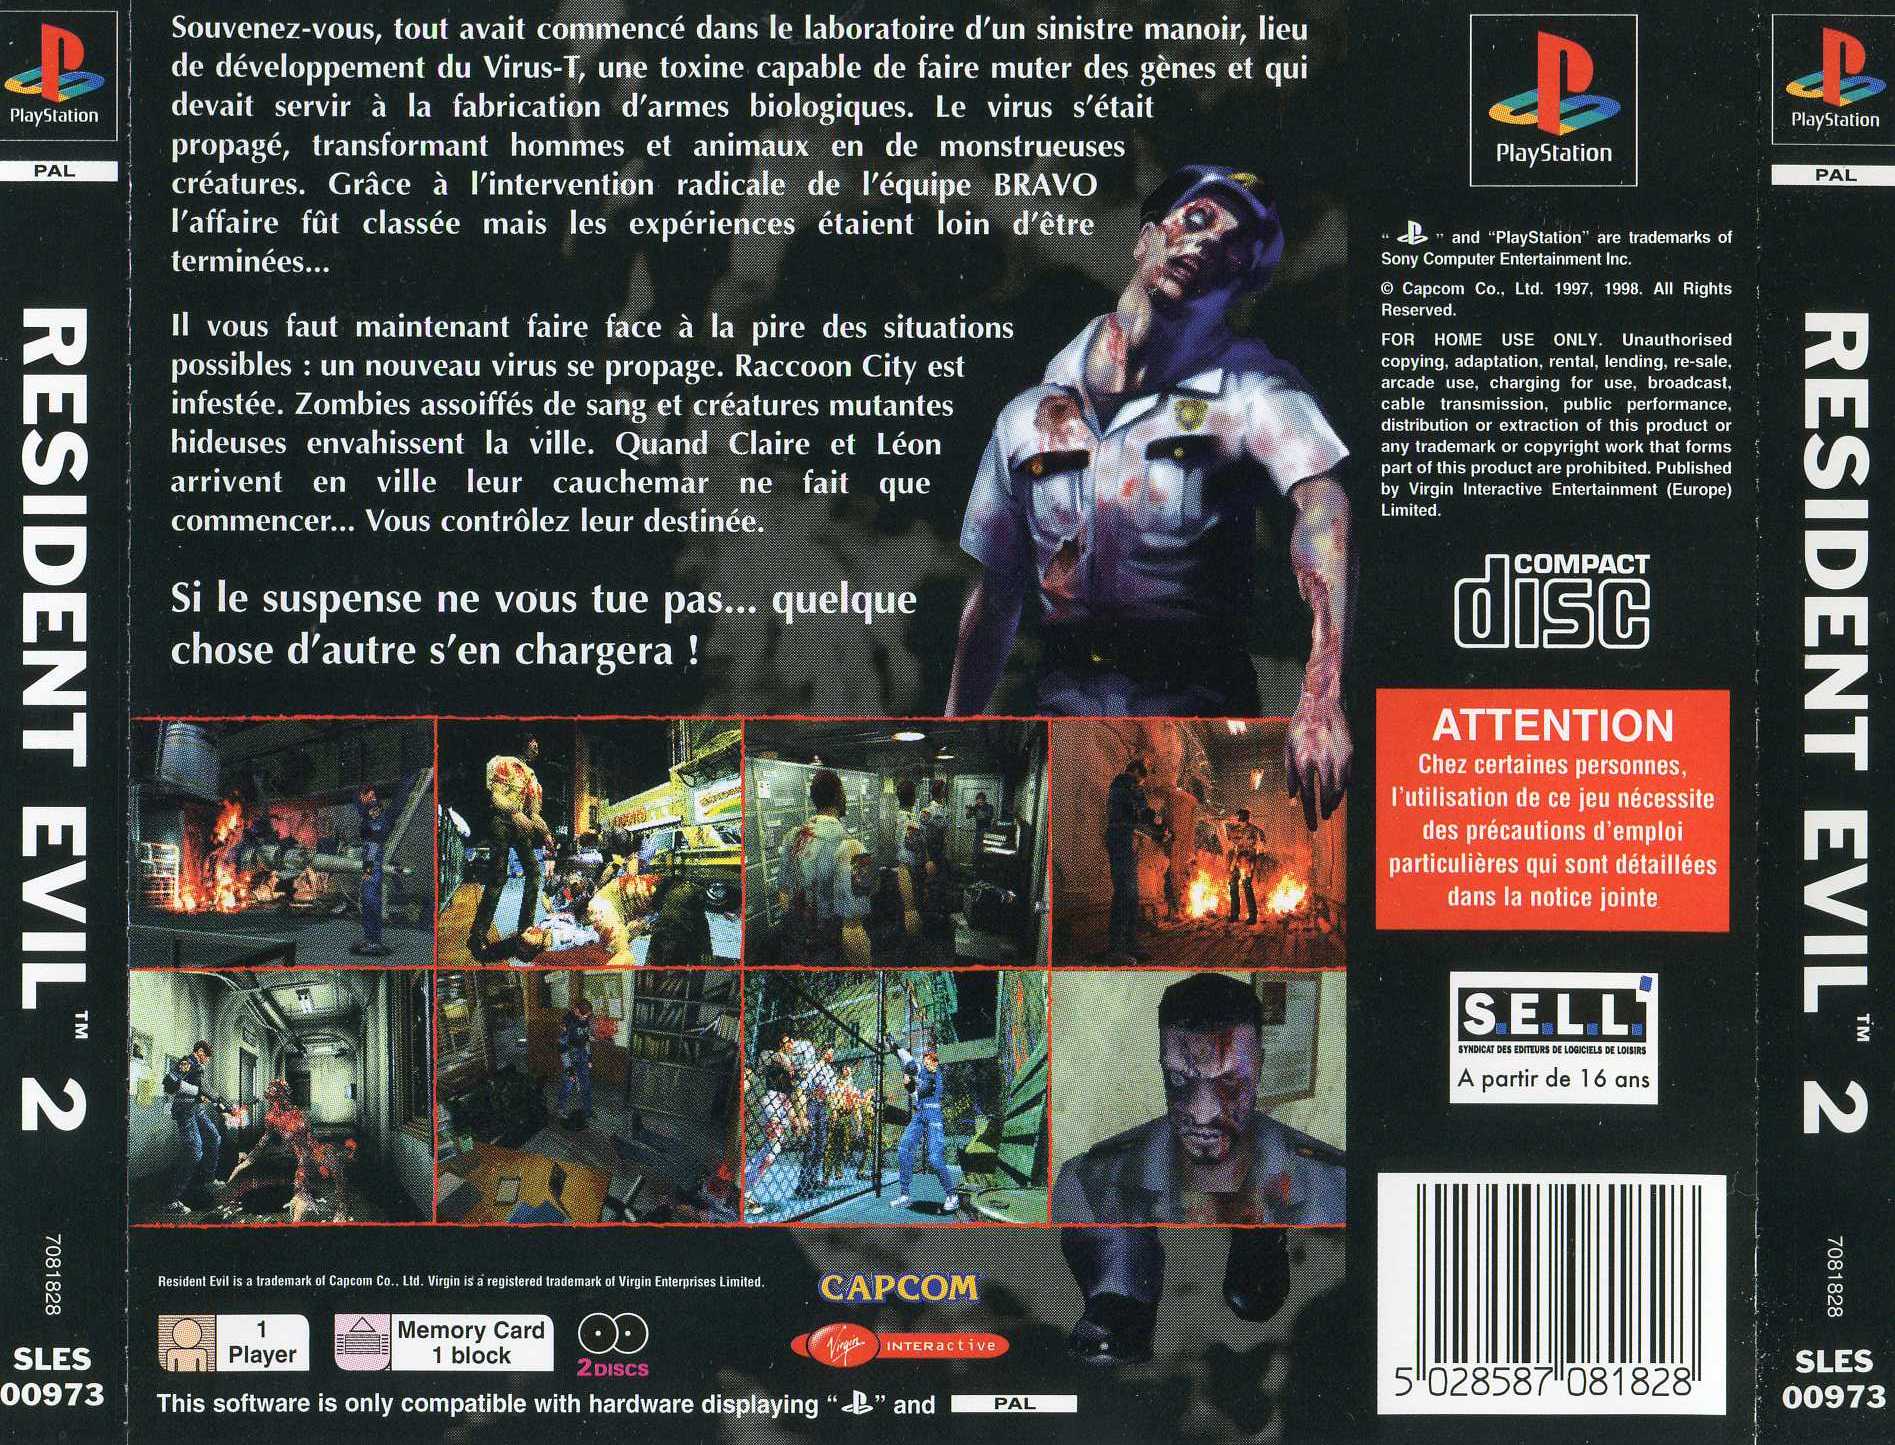 Playstation 2 Cover PAL ( Template ) by Essinay on DeviantArt